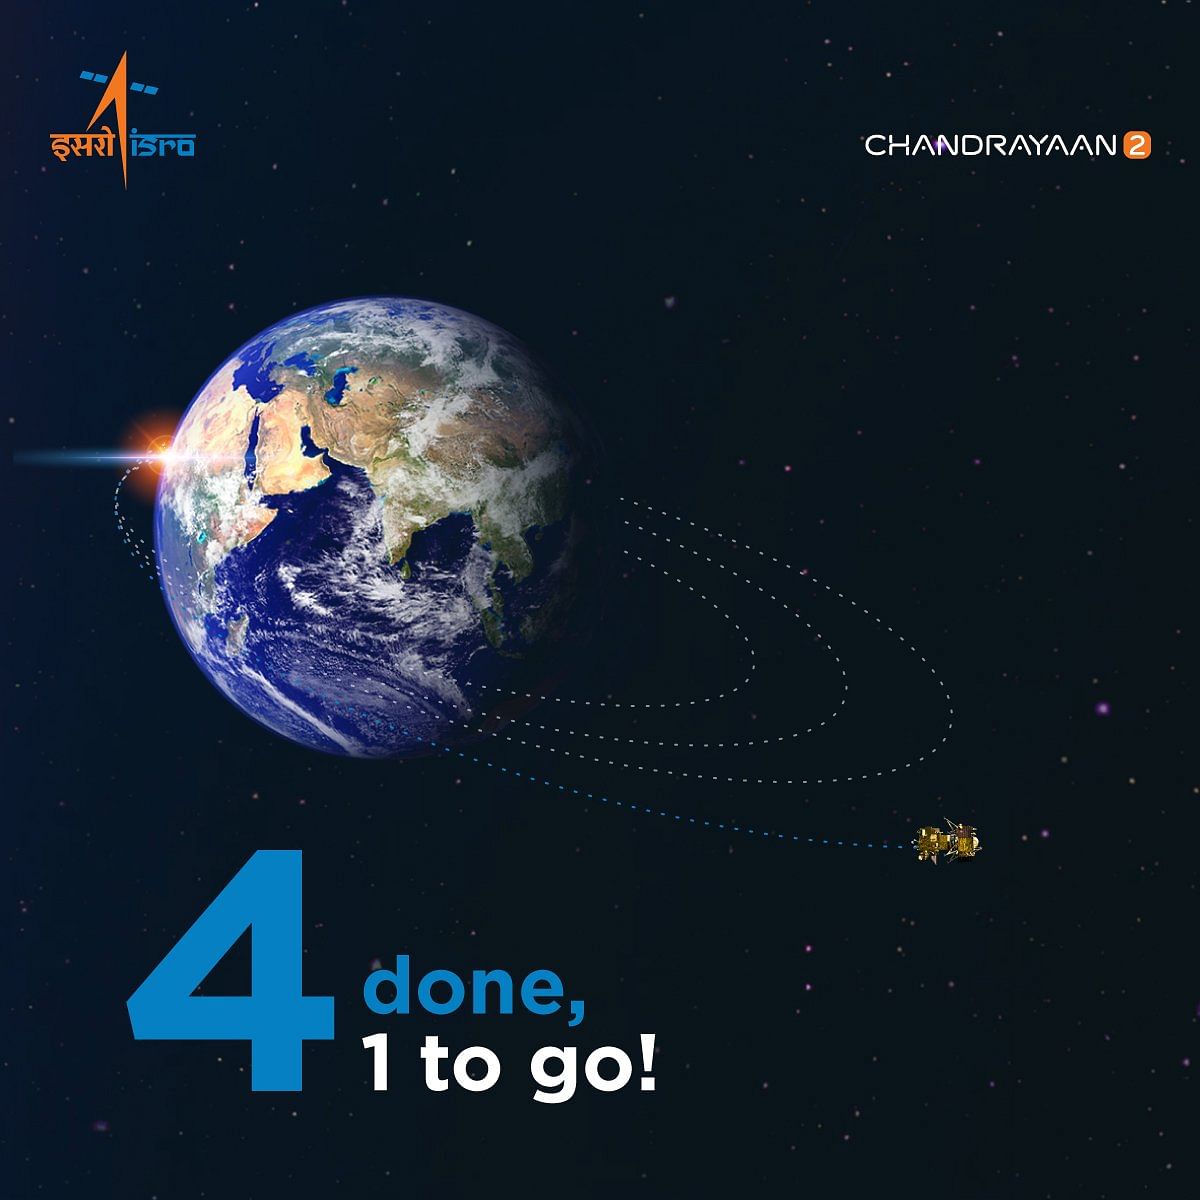 Chandrayaan-2: One step from leaving Earth orbit